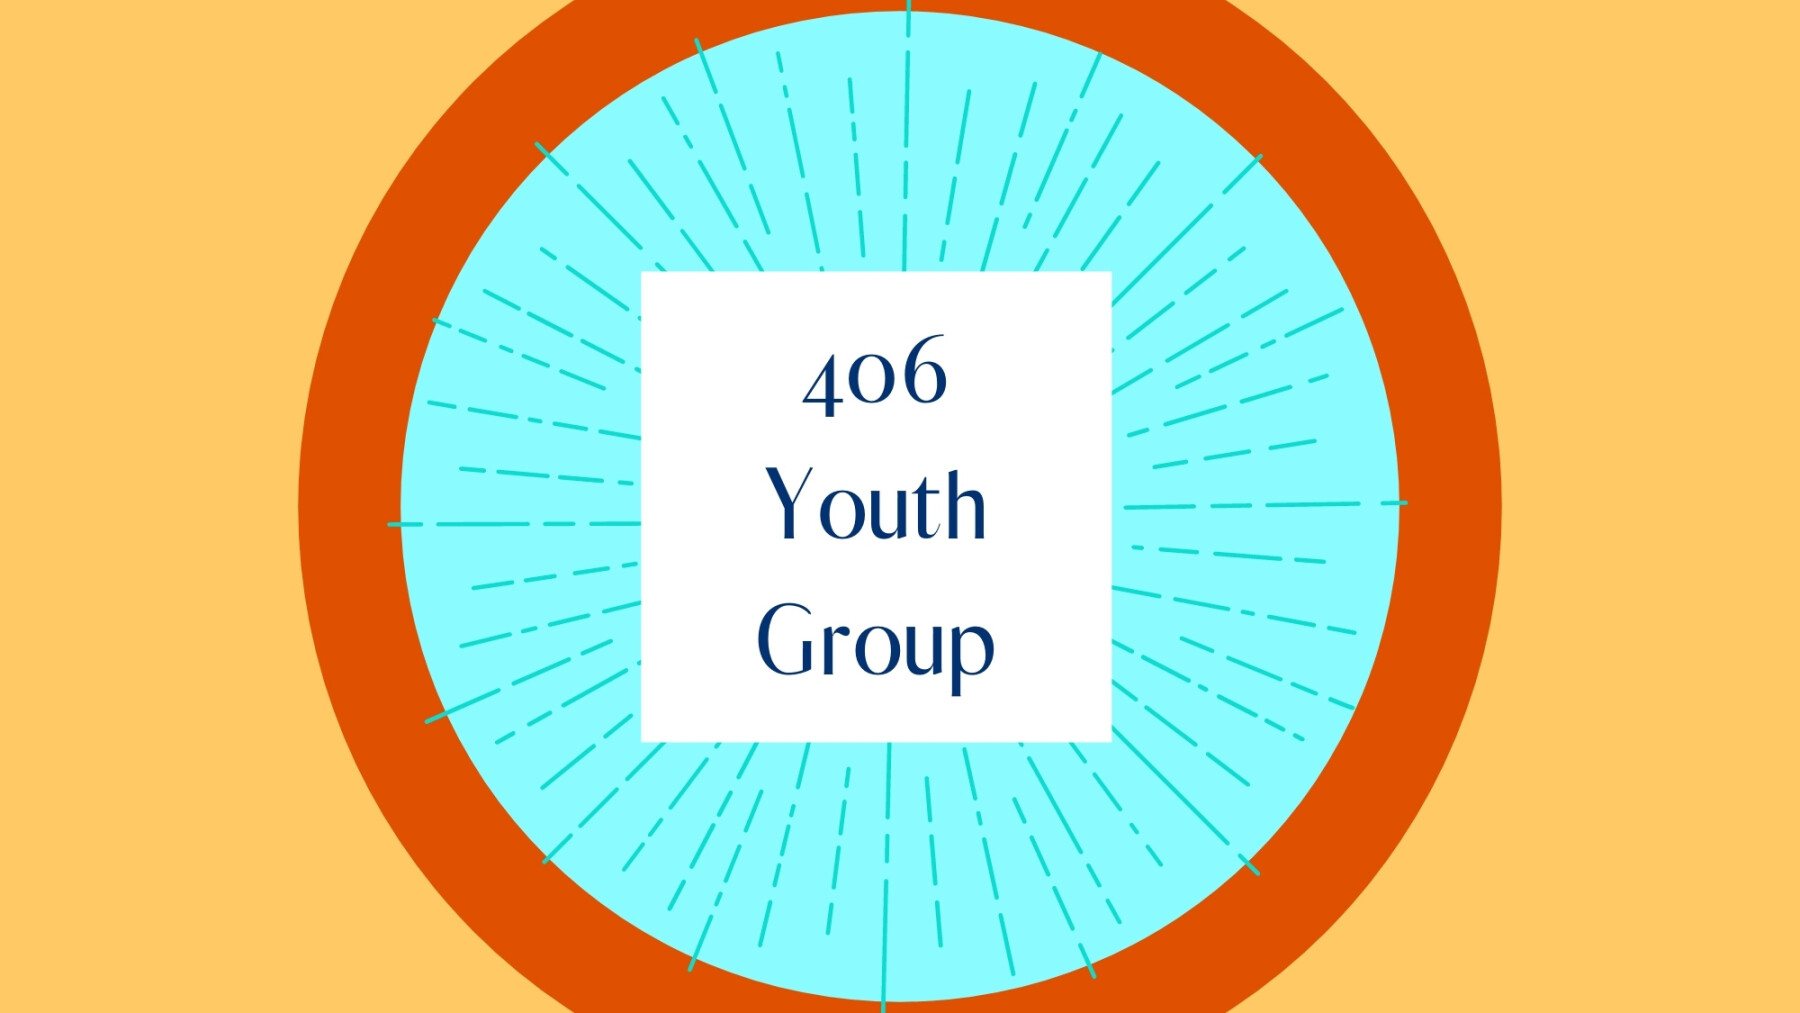 406 Youth Group